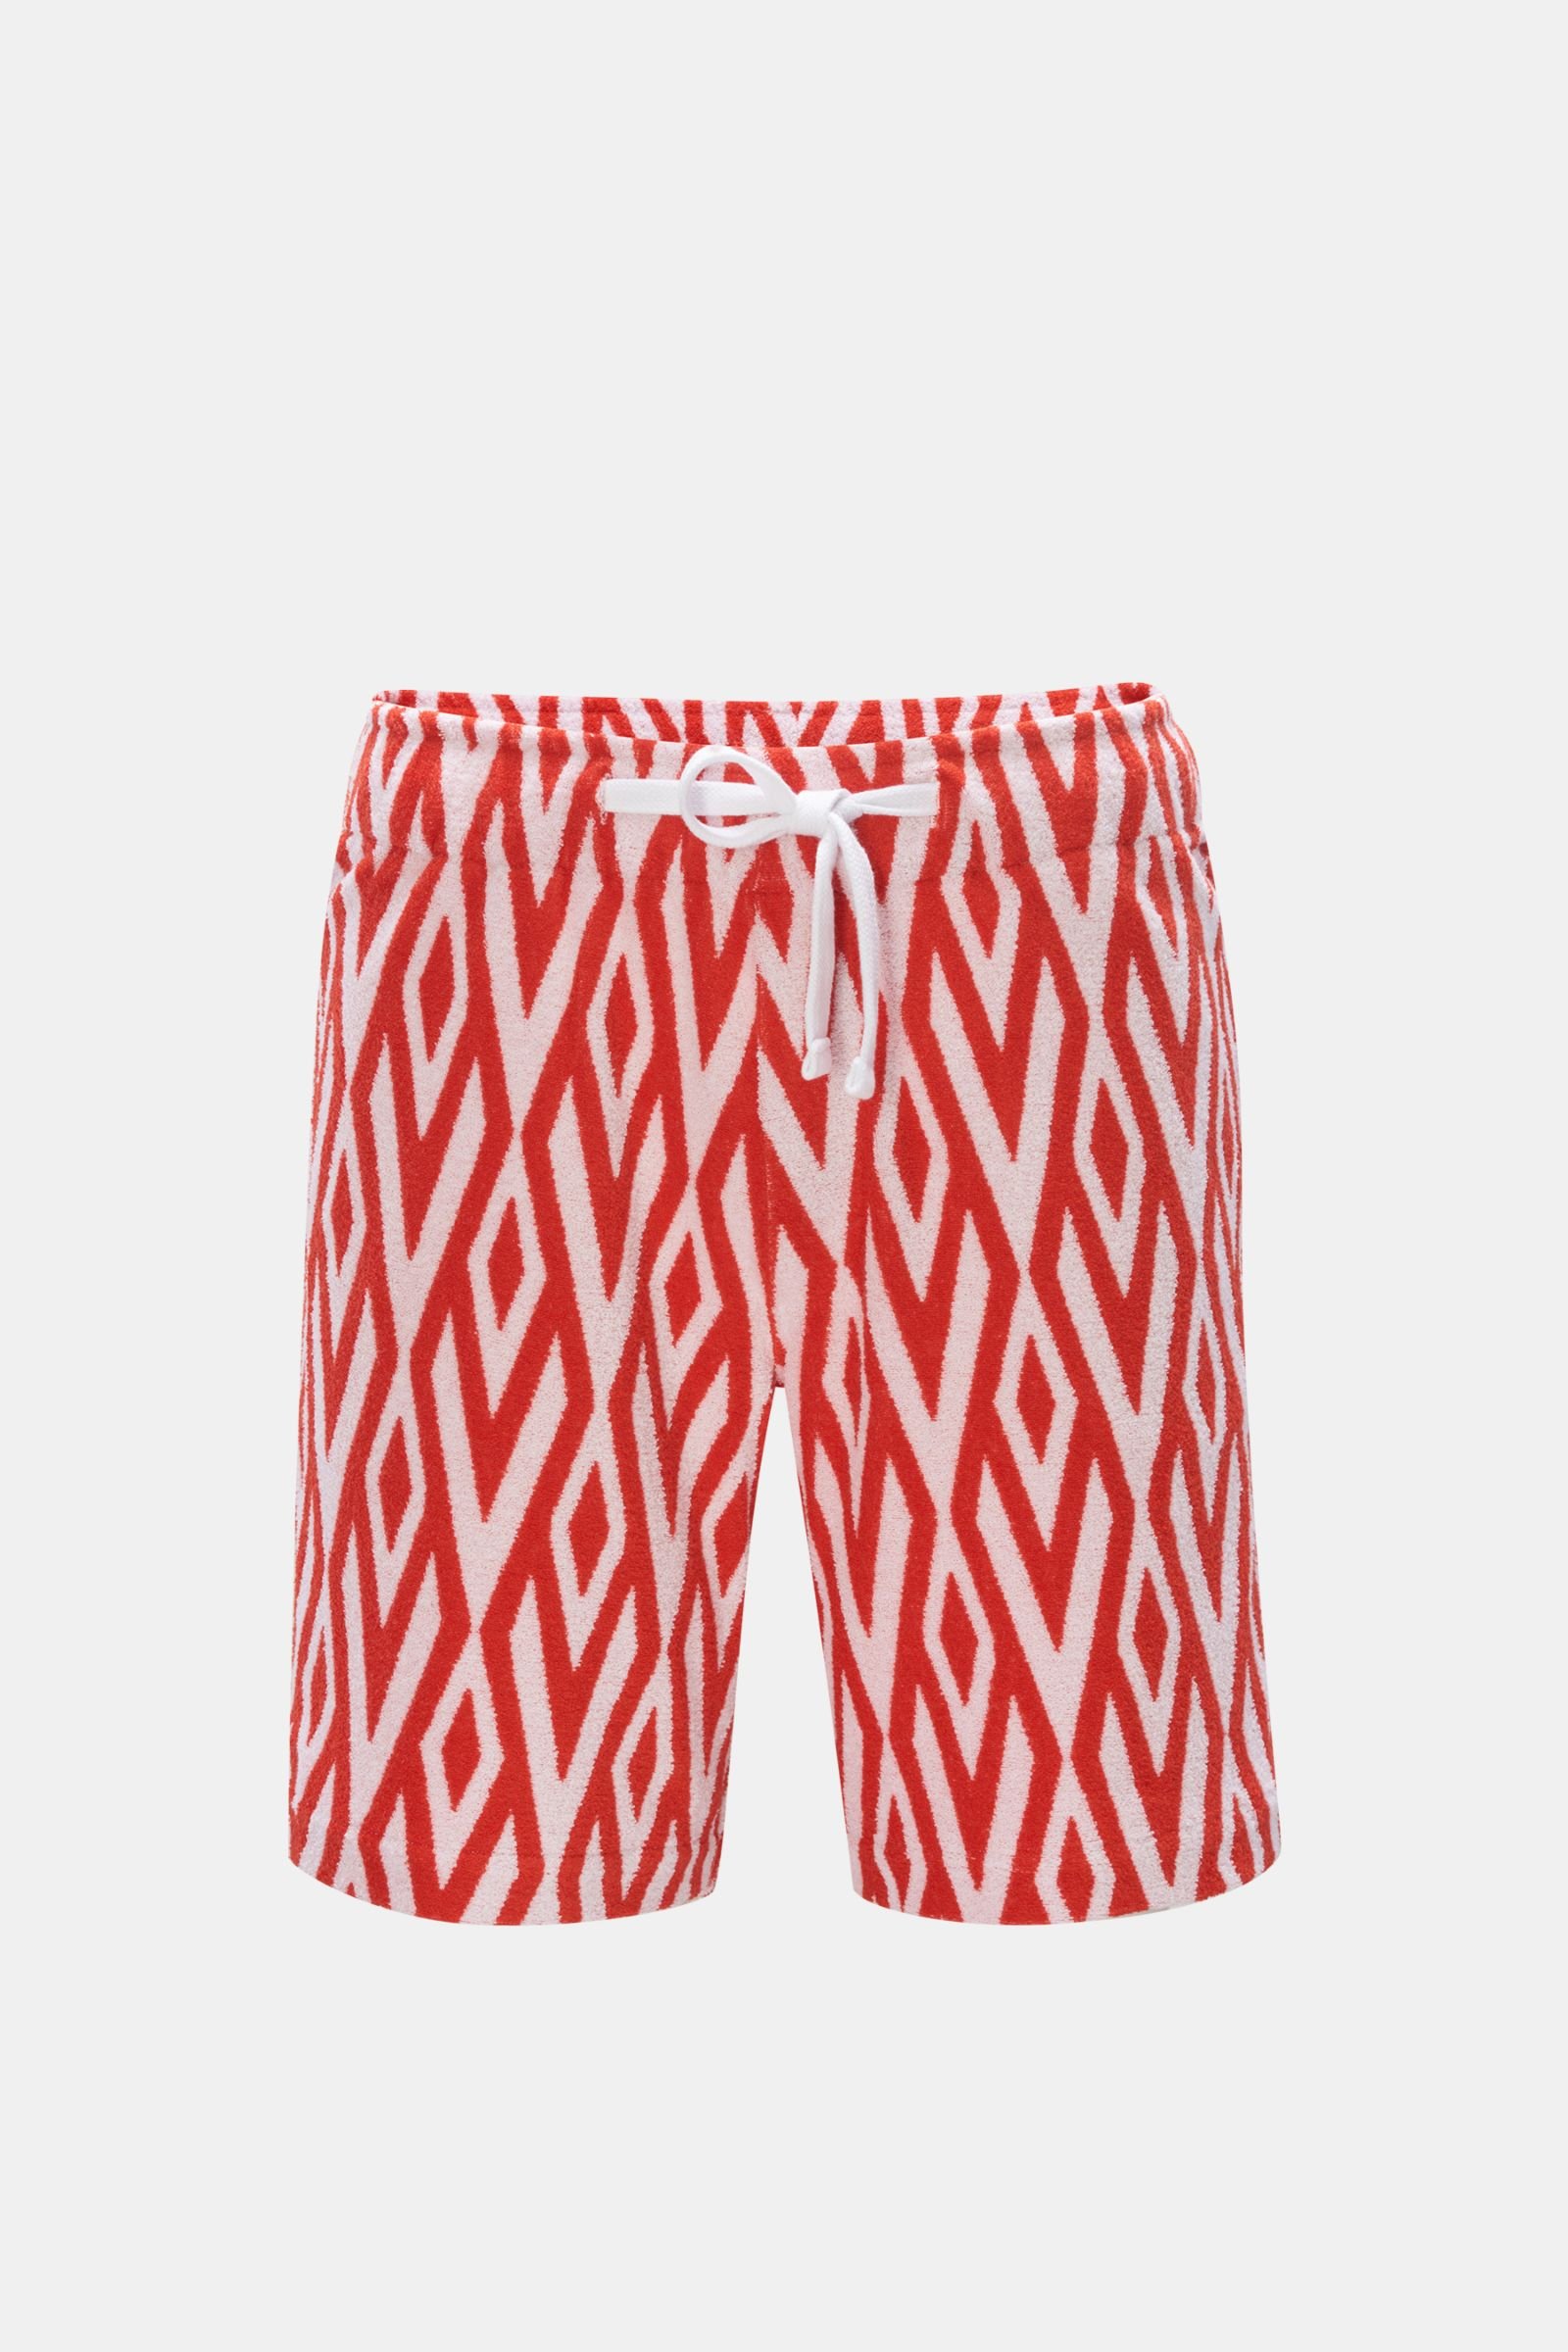 Terry shorts 'Trevone Cano Jacquard' red/white patterned